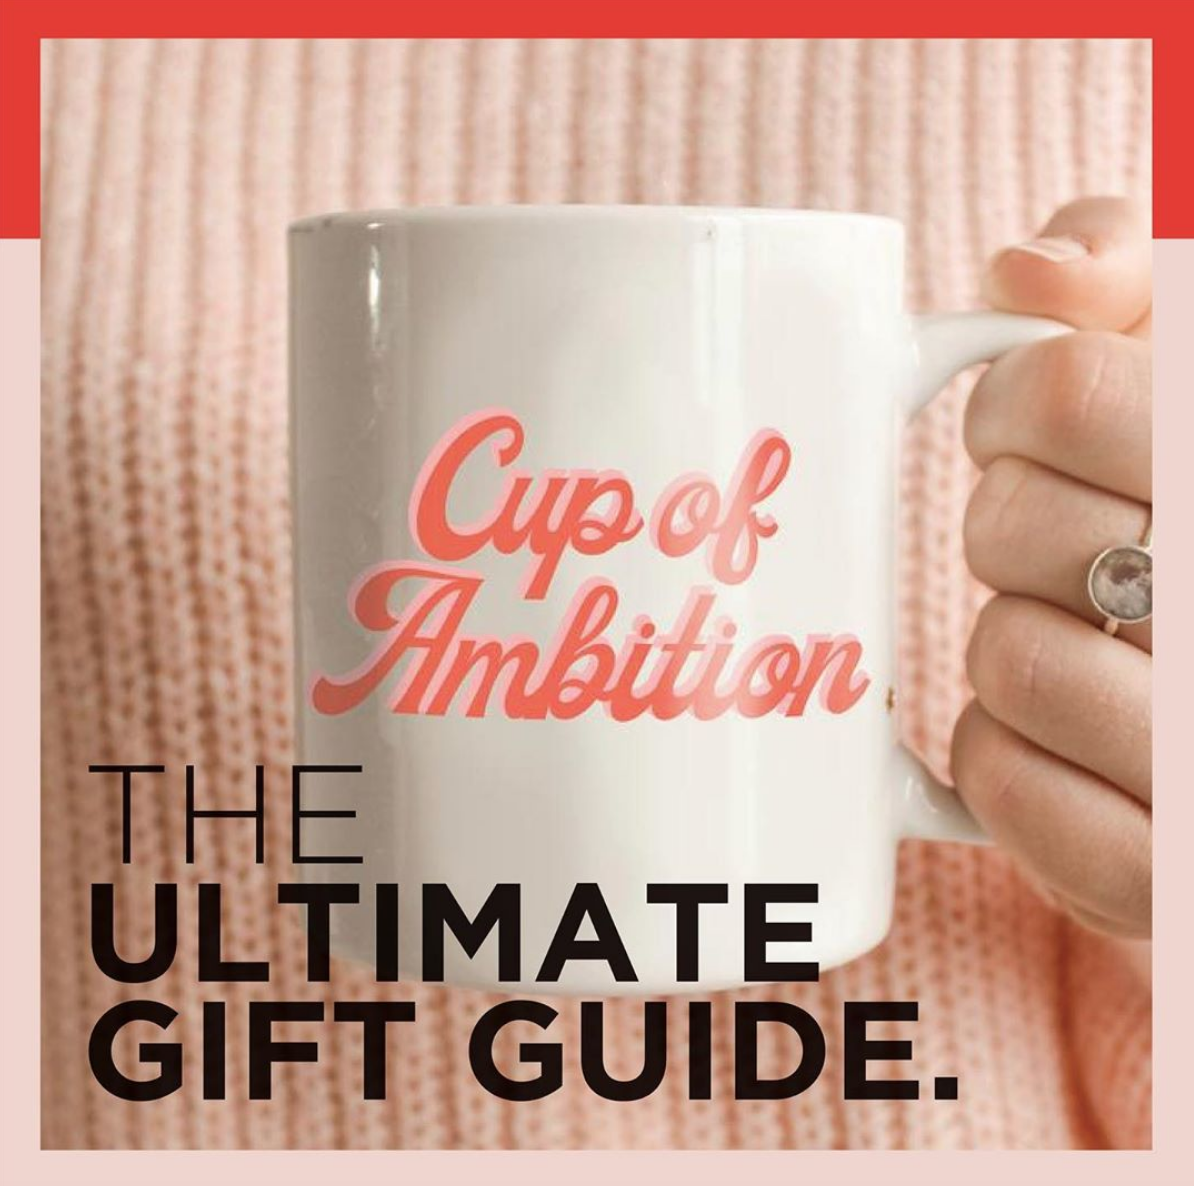 Gift guide Instagram announcement 2019